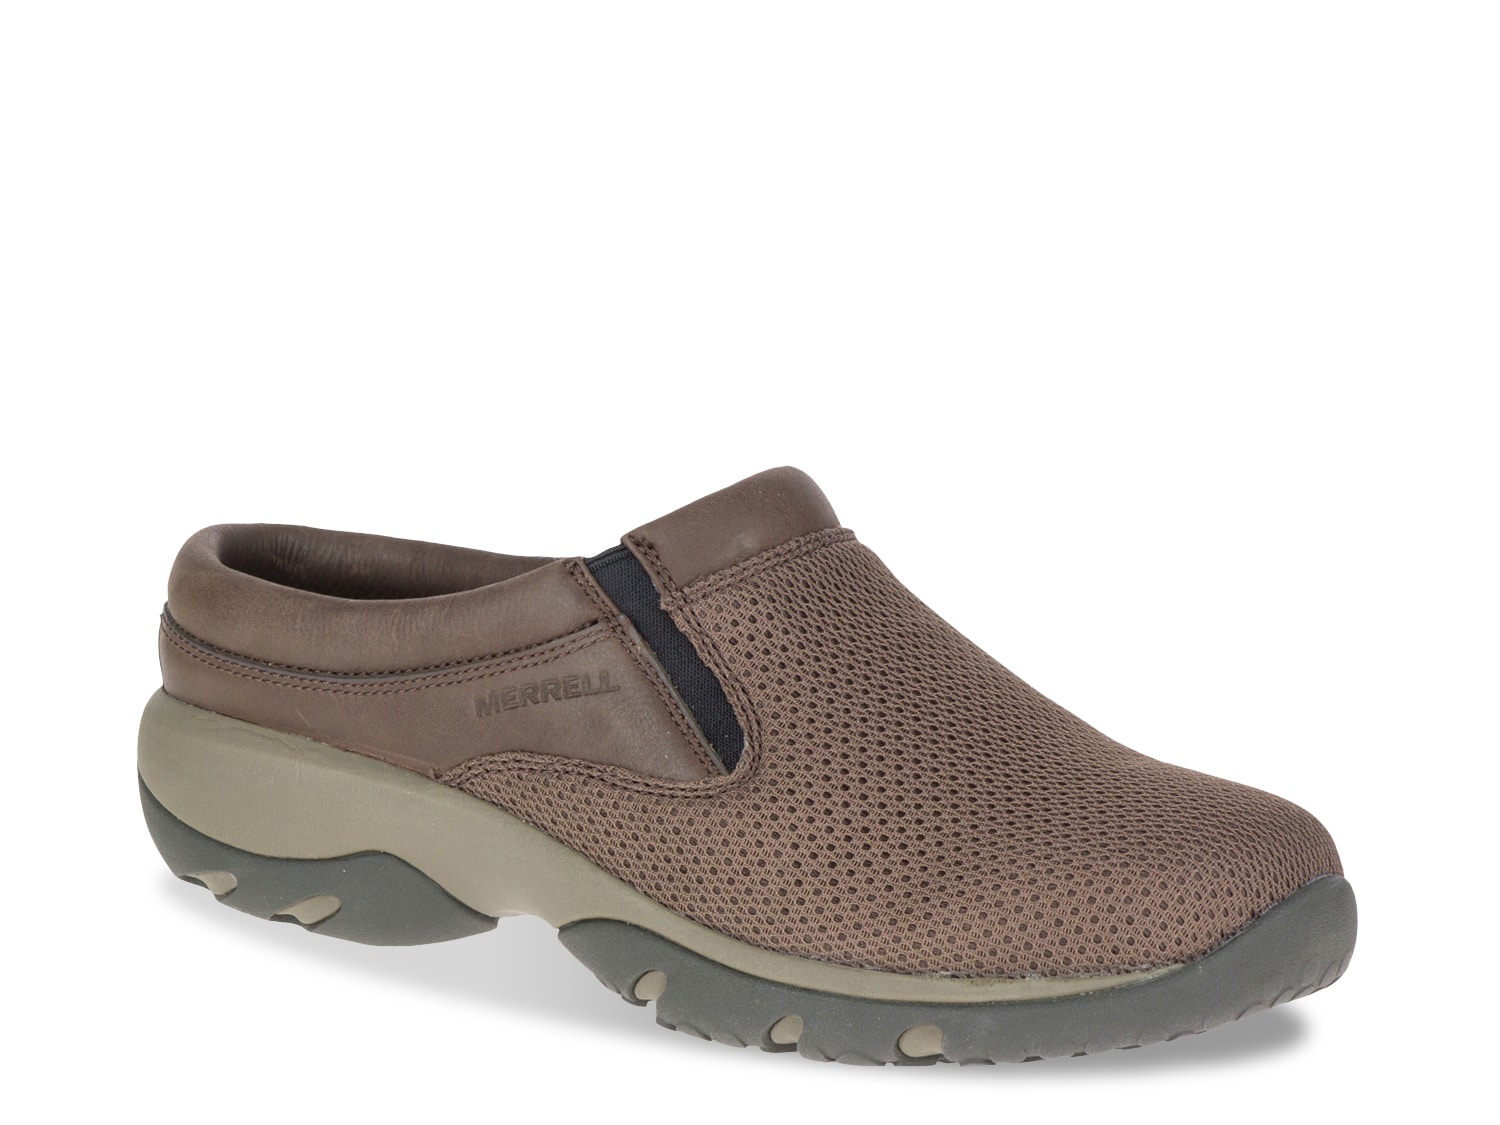 merrell leather clogs